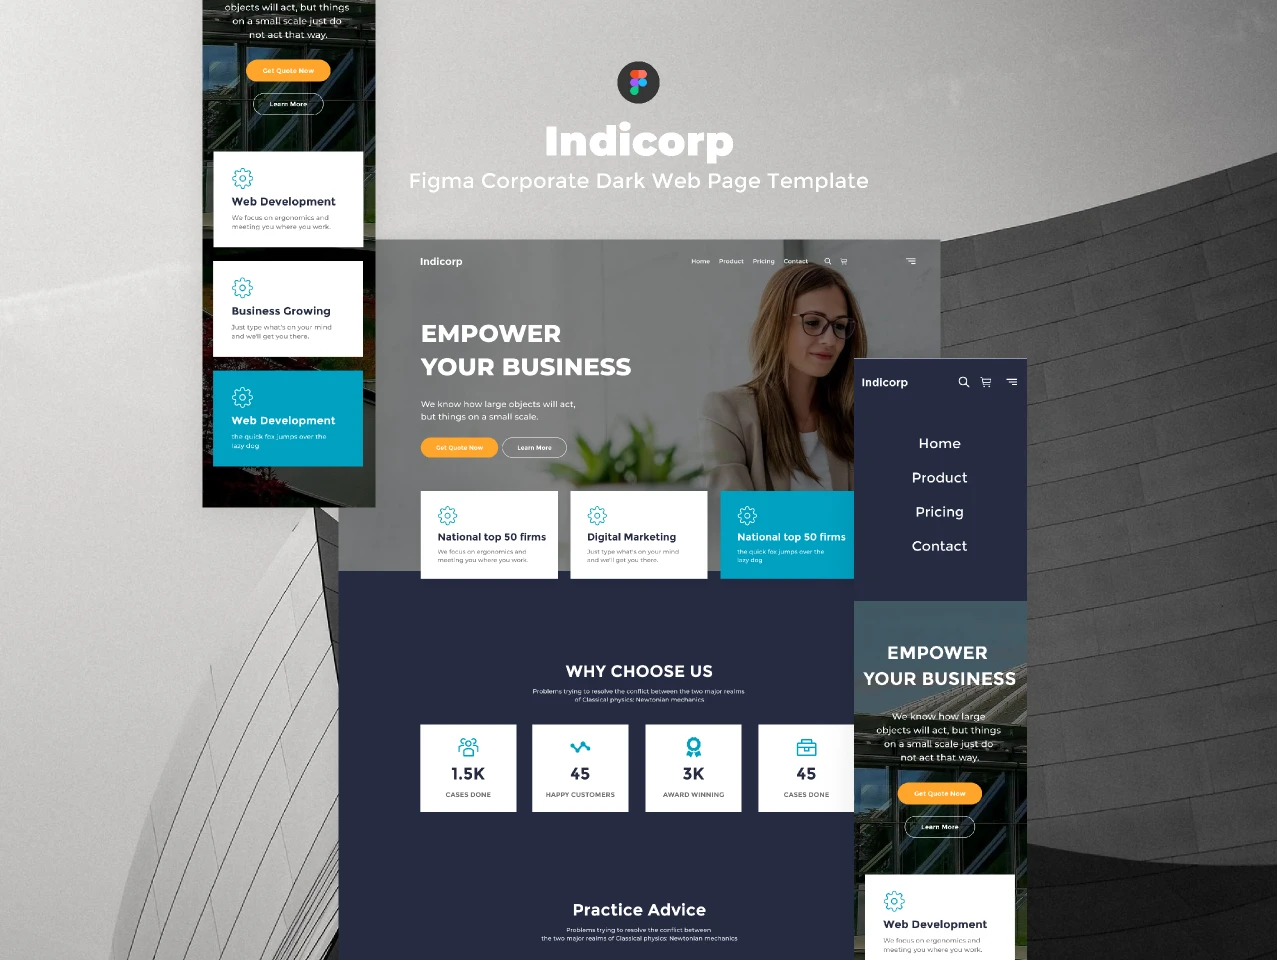 Indicorp - Figma Corporate Dark Web Page Template for Figma and Adobe XD